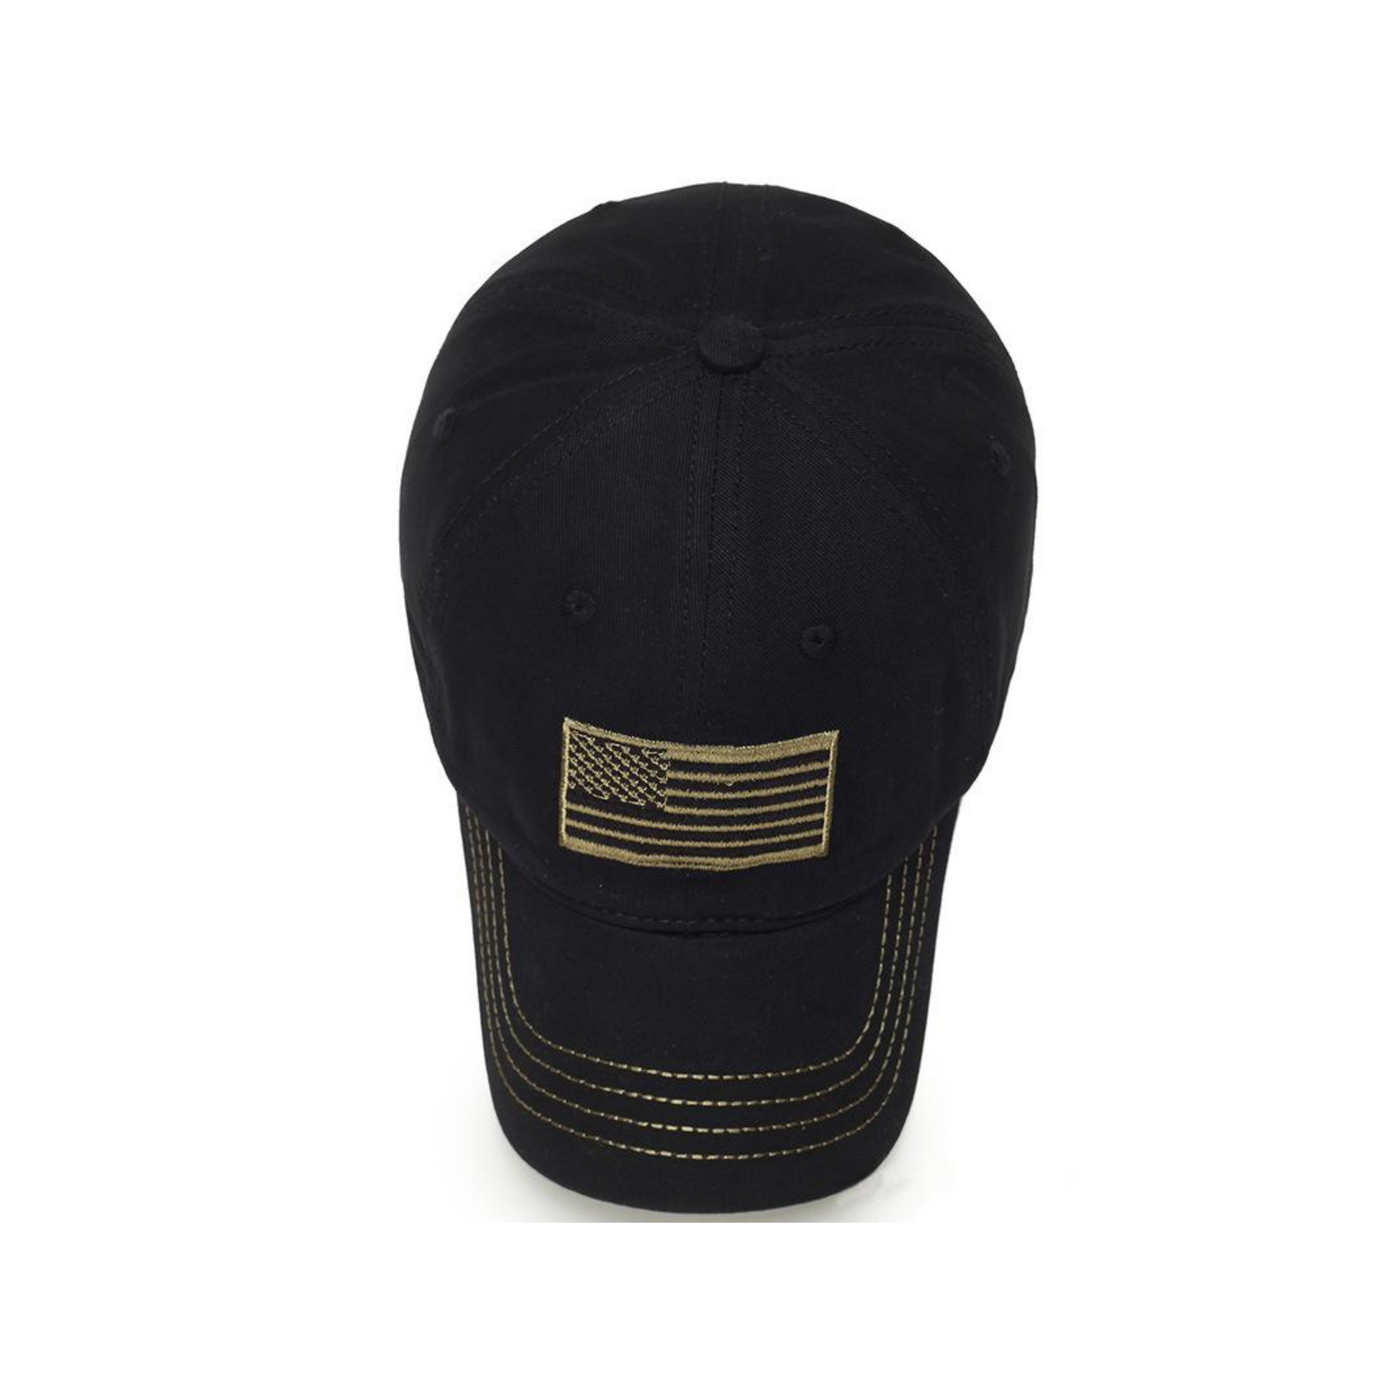 Fashion meets patriotism: Camouflage Baseball Cap with US Flag